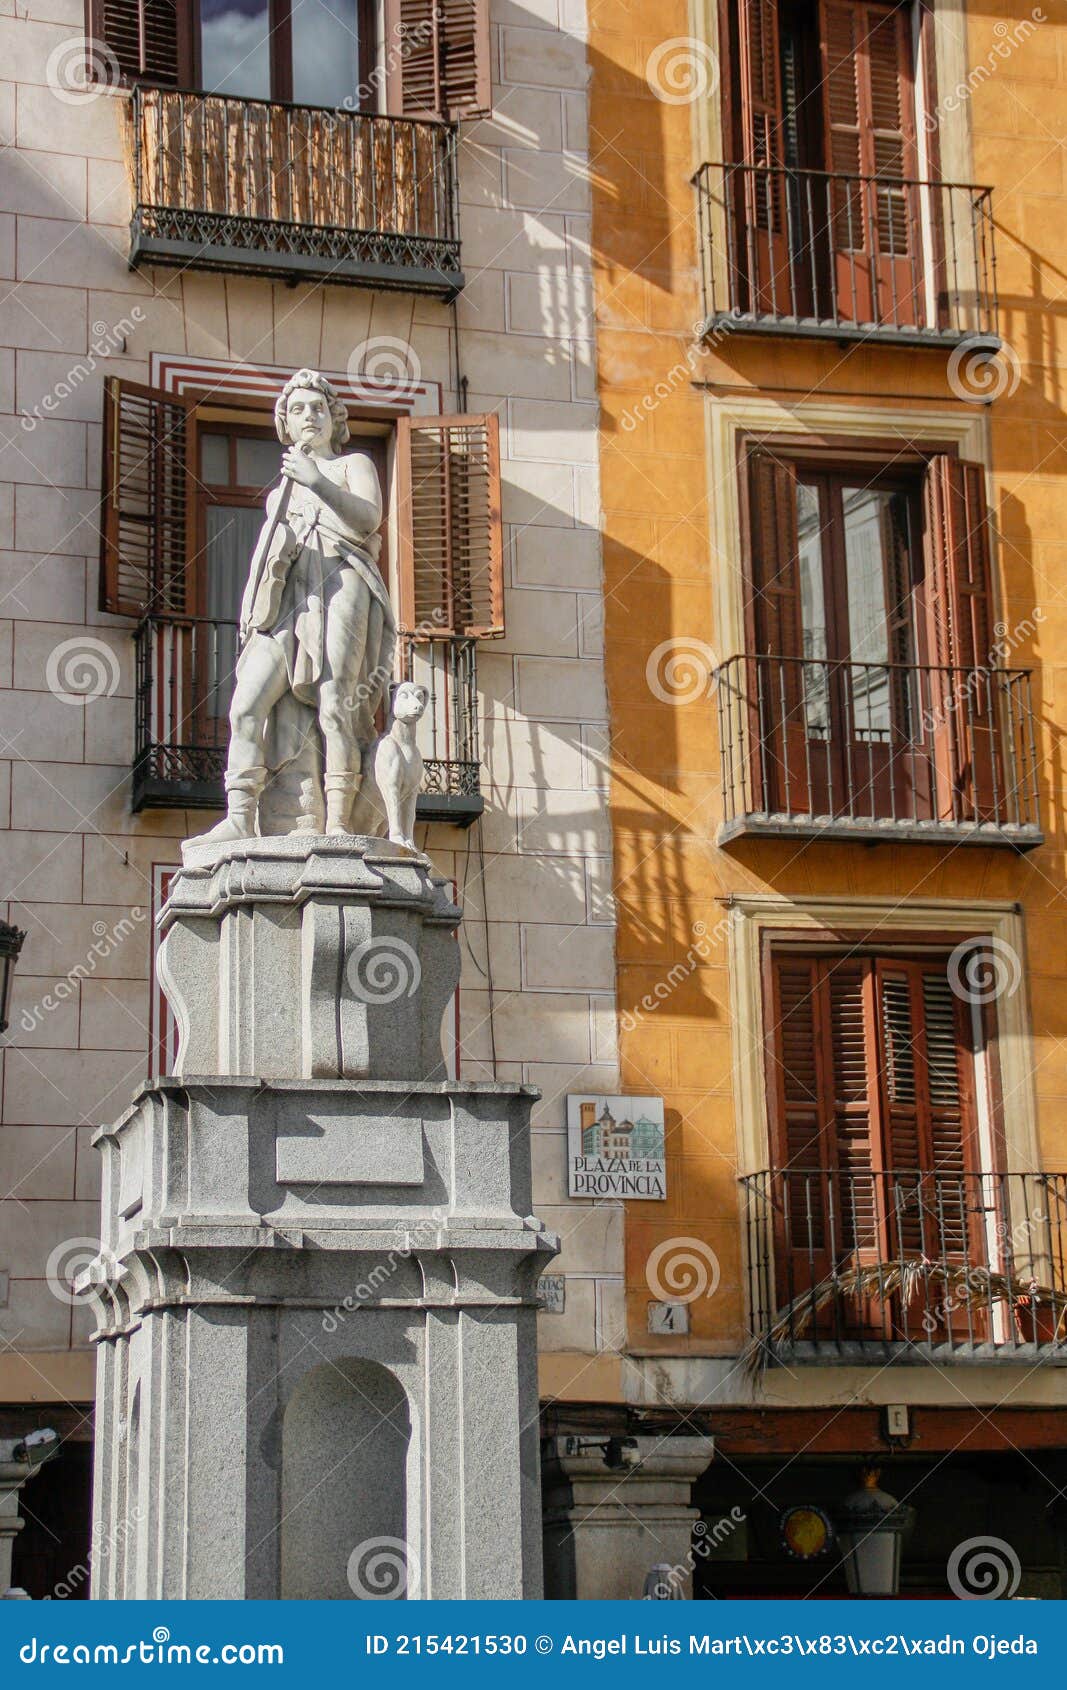 orfeo sculpture on the orfeo fountain in the square of the province, madrid, spain.